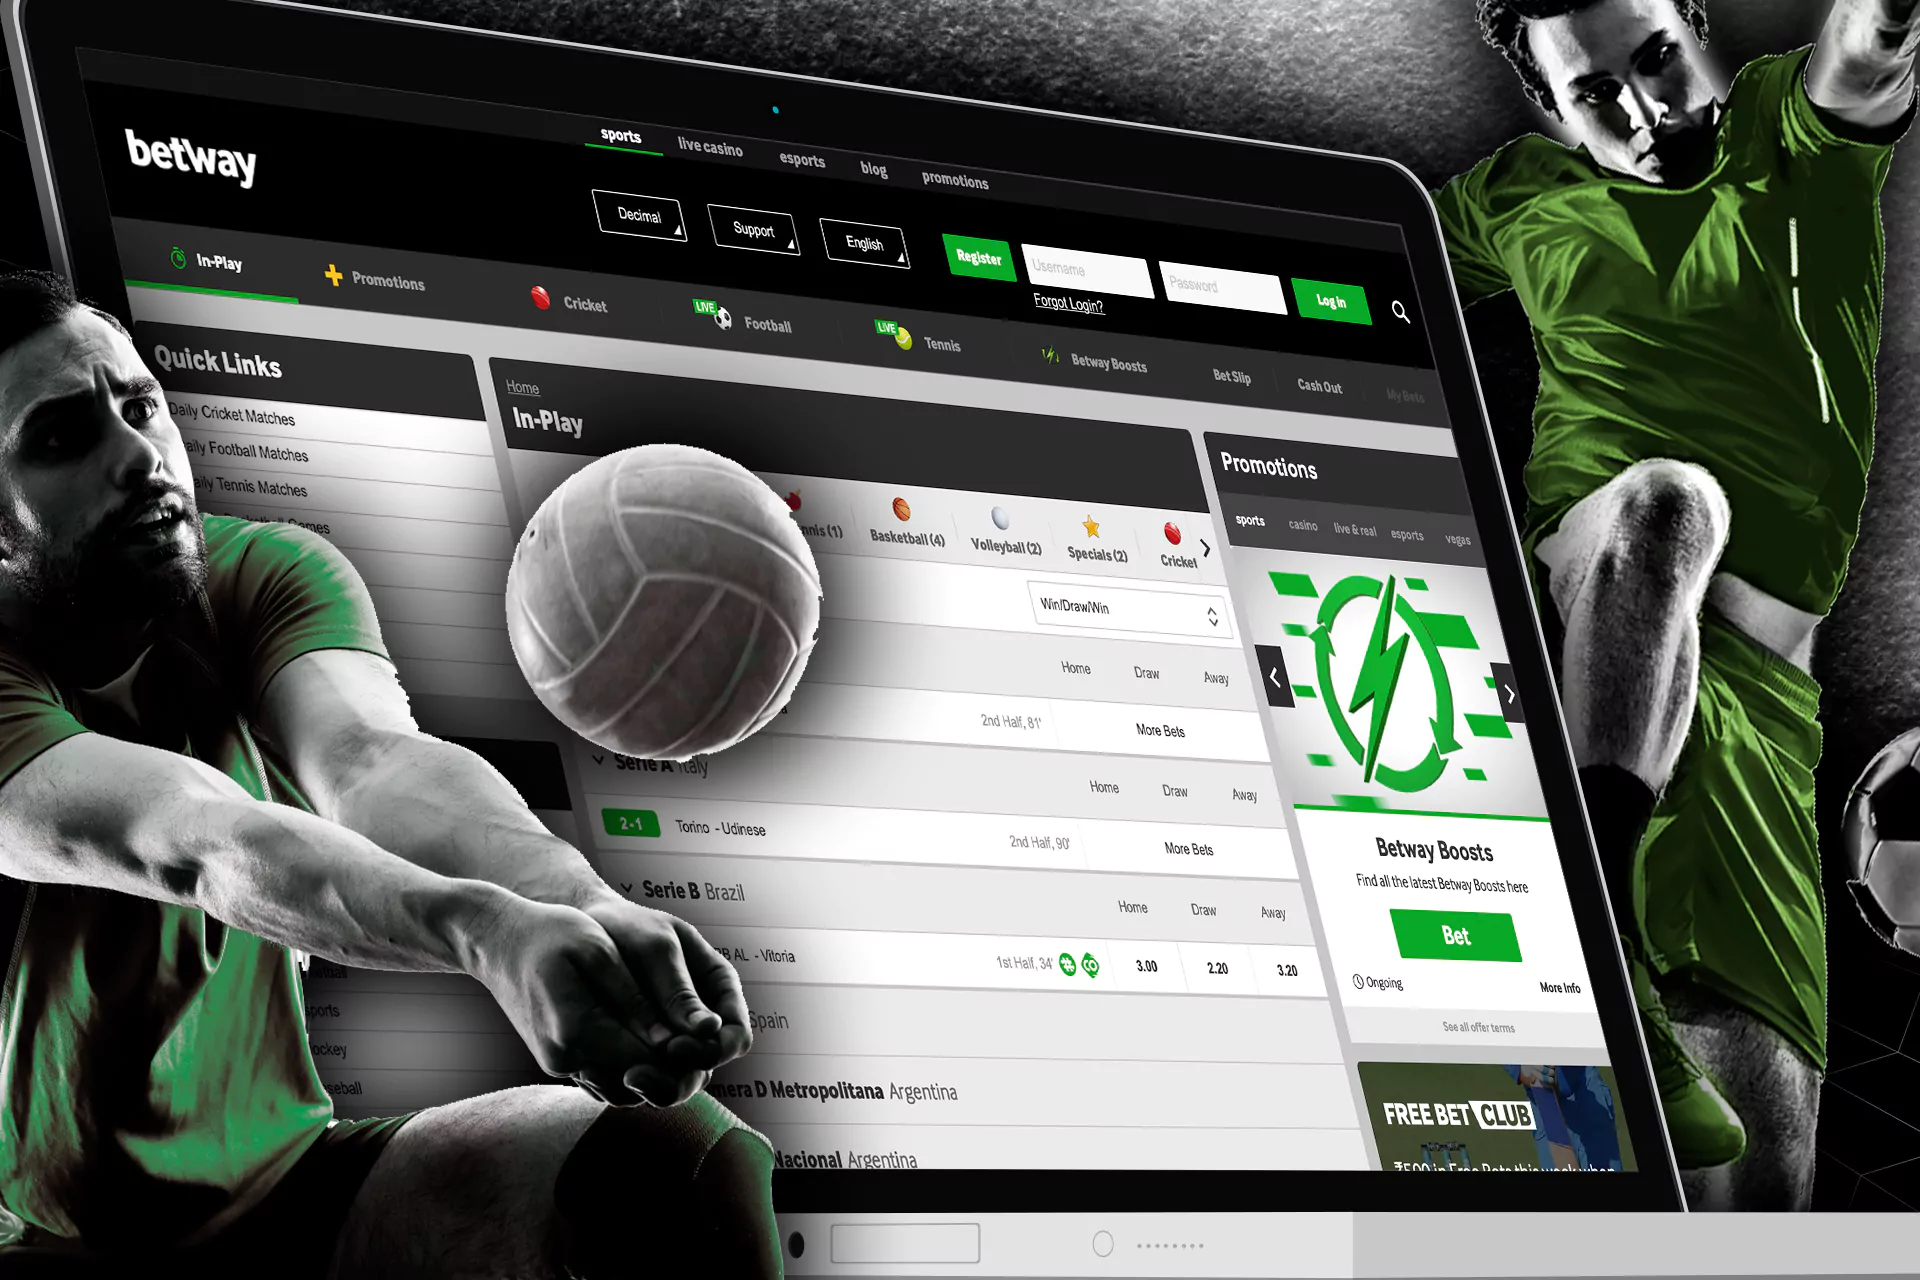 Every bettor will find the sport of his liking at Betway.